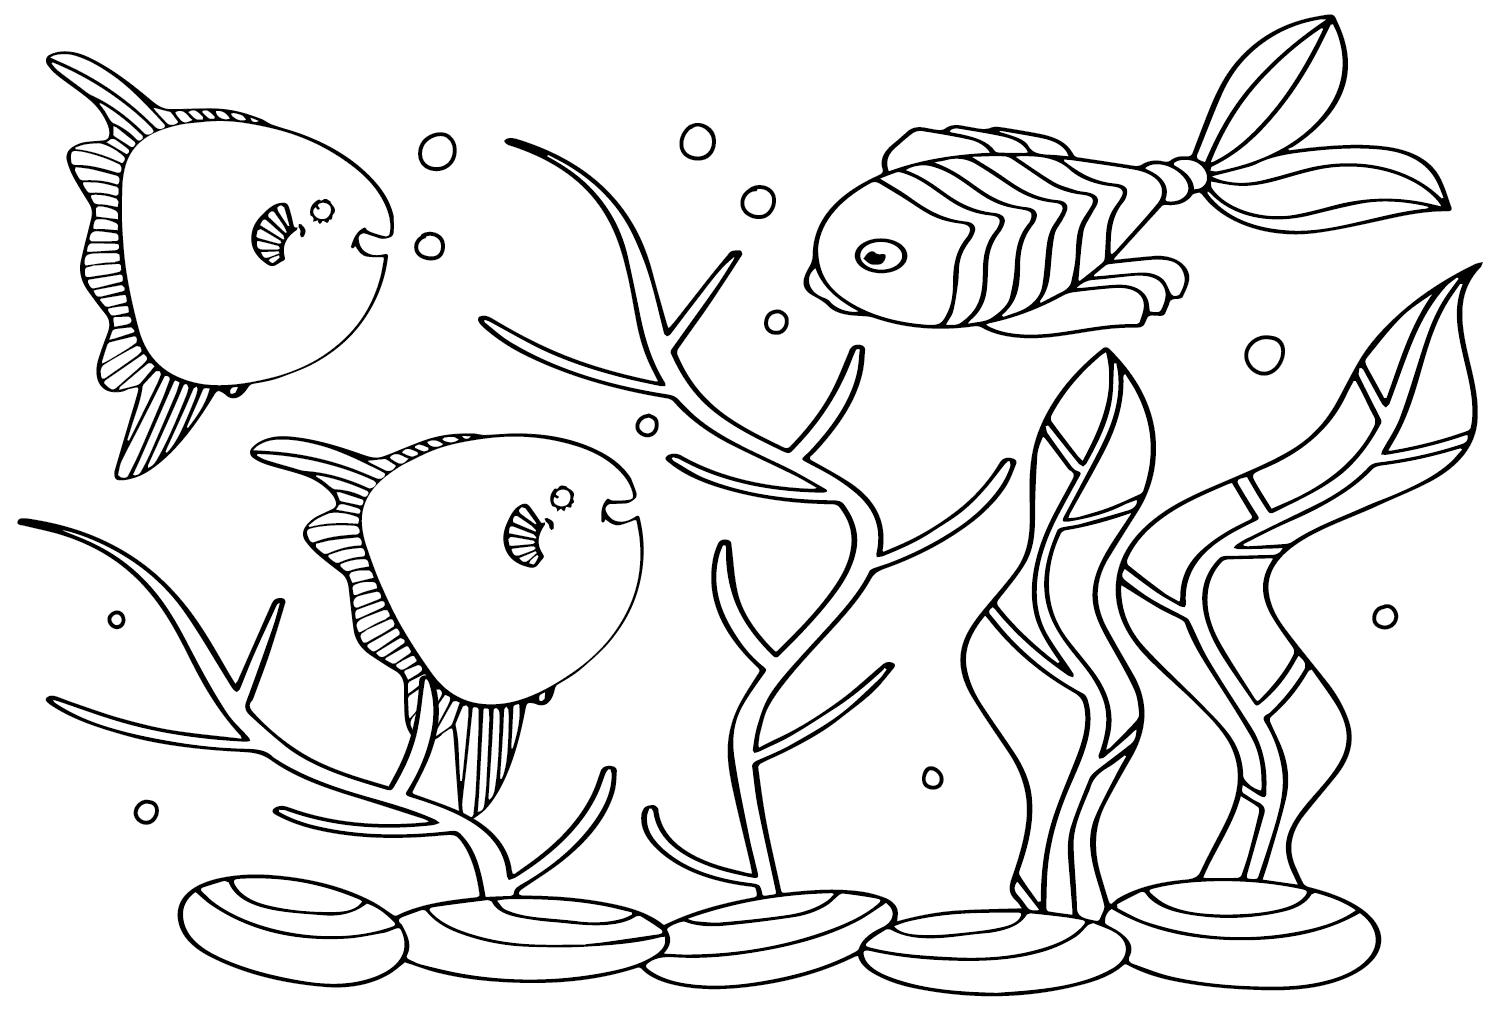 Mola Mola Coloring Page - Free Printable Coloring Pages